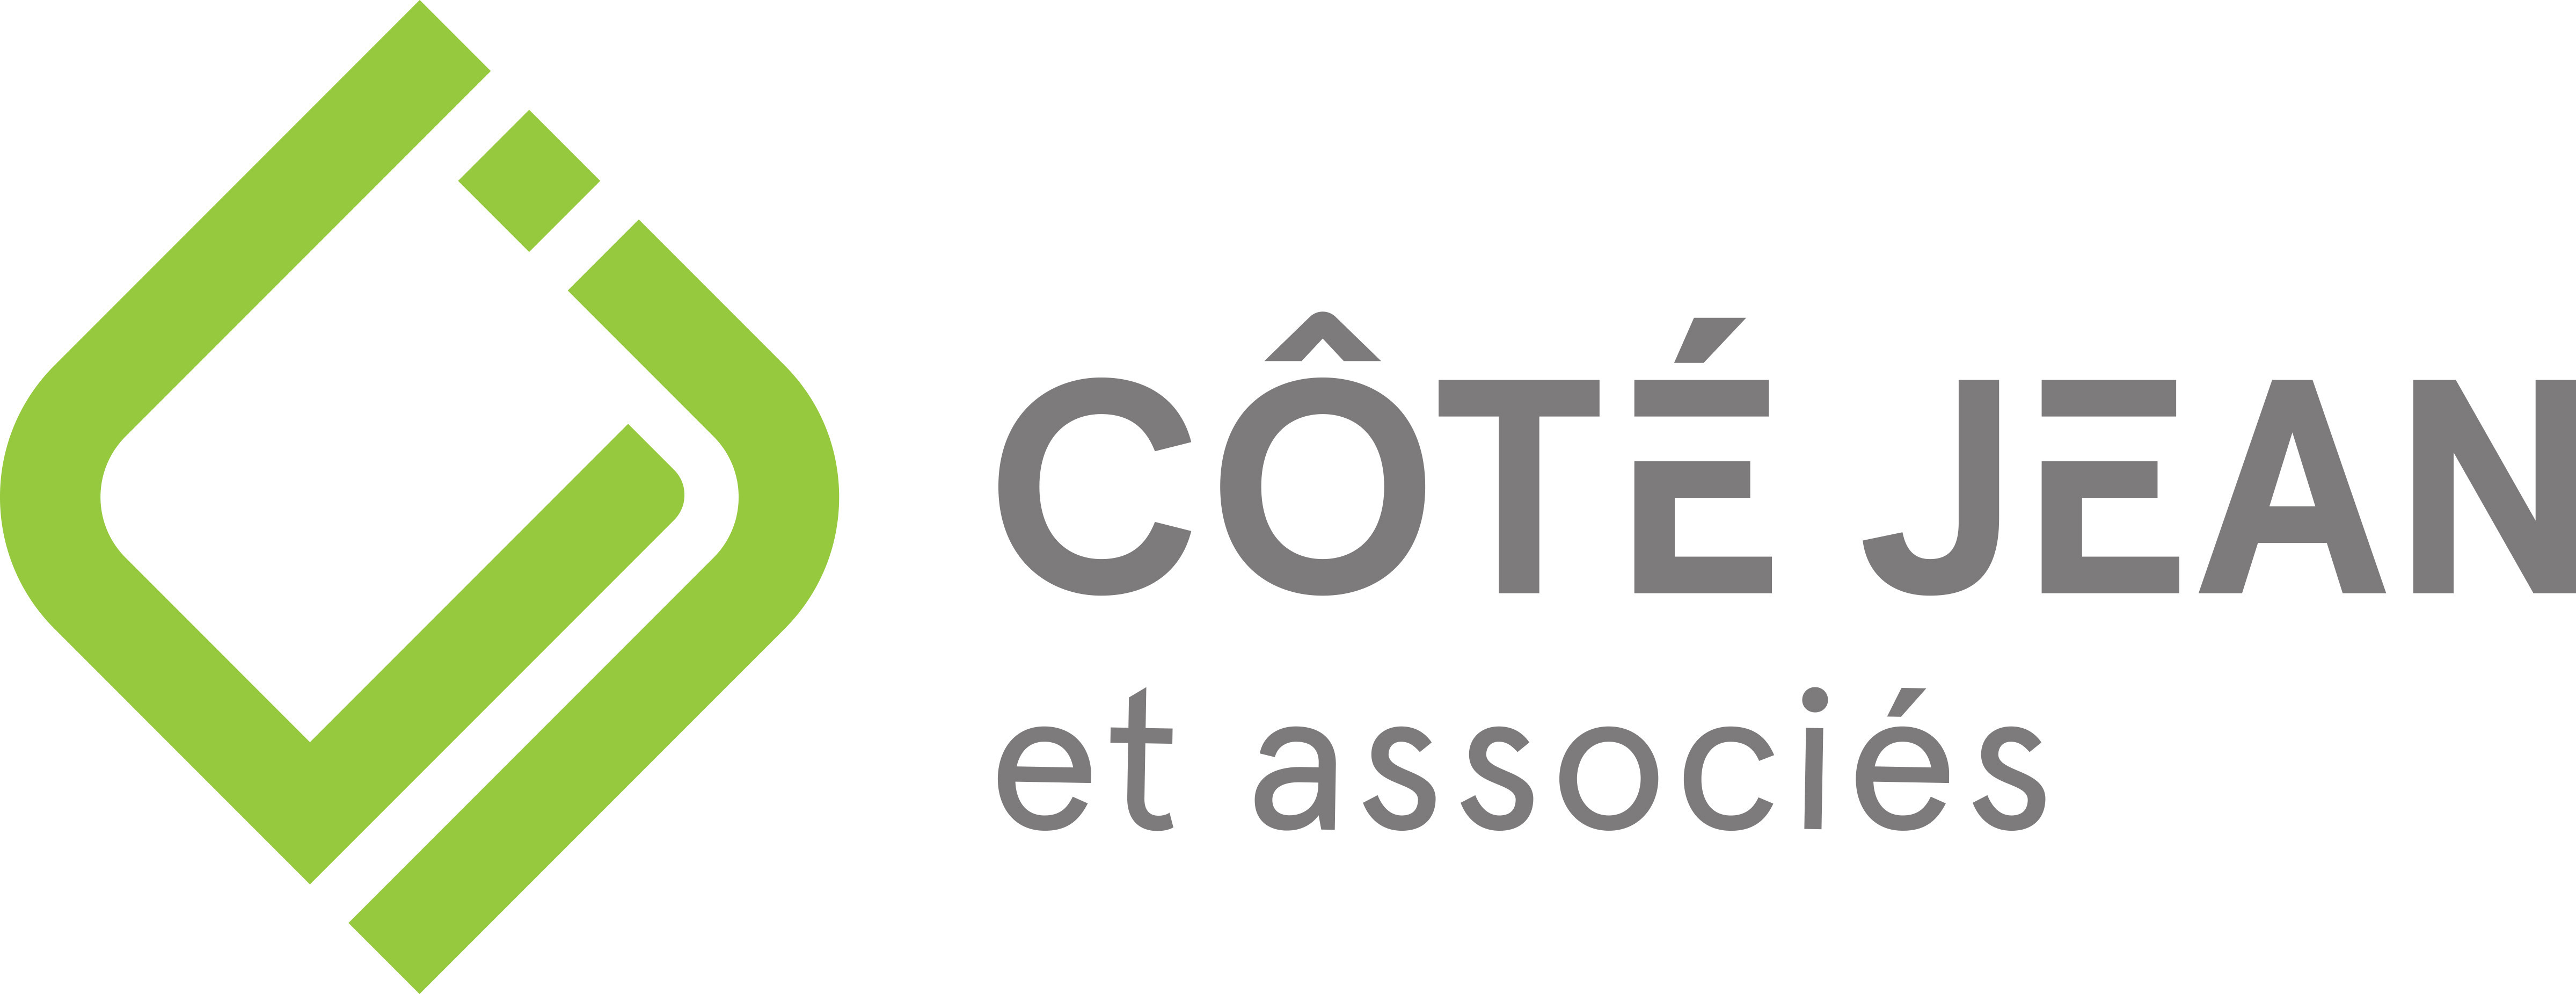 Cote Jean associees